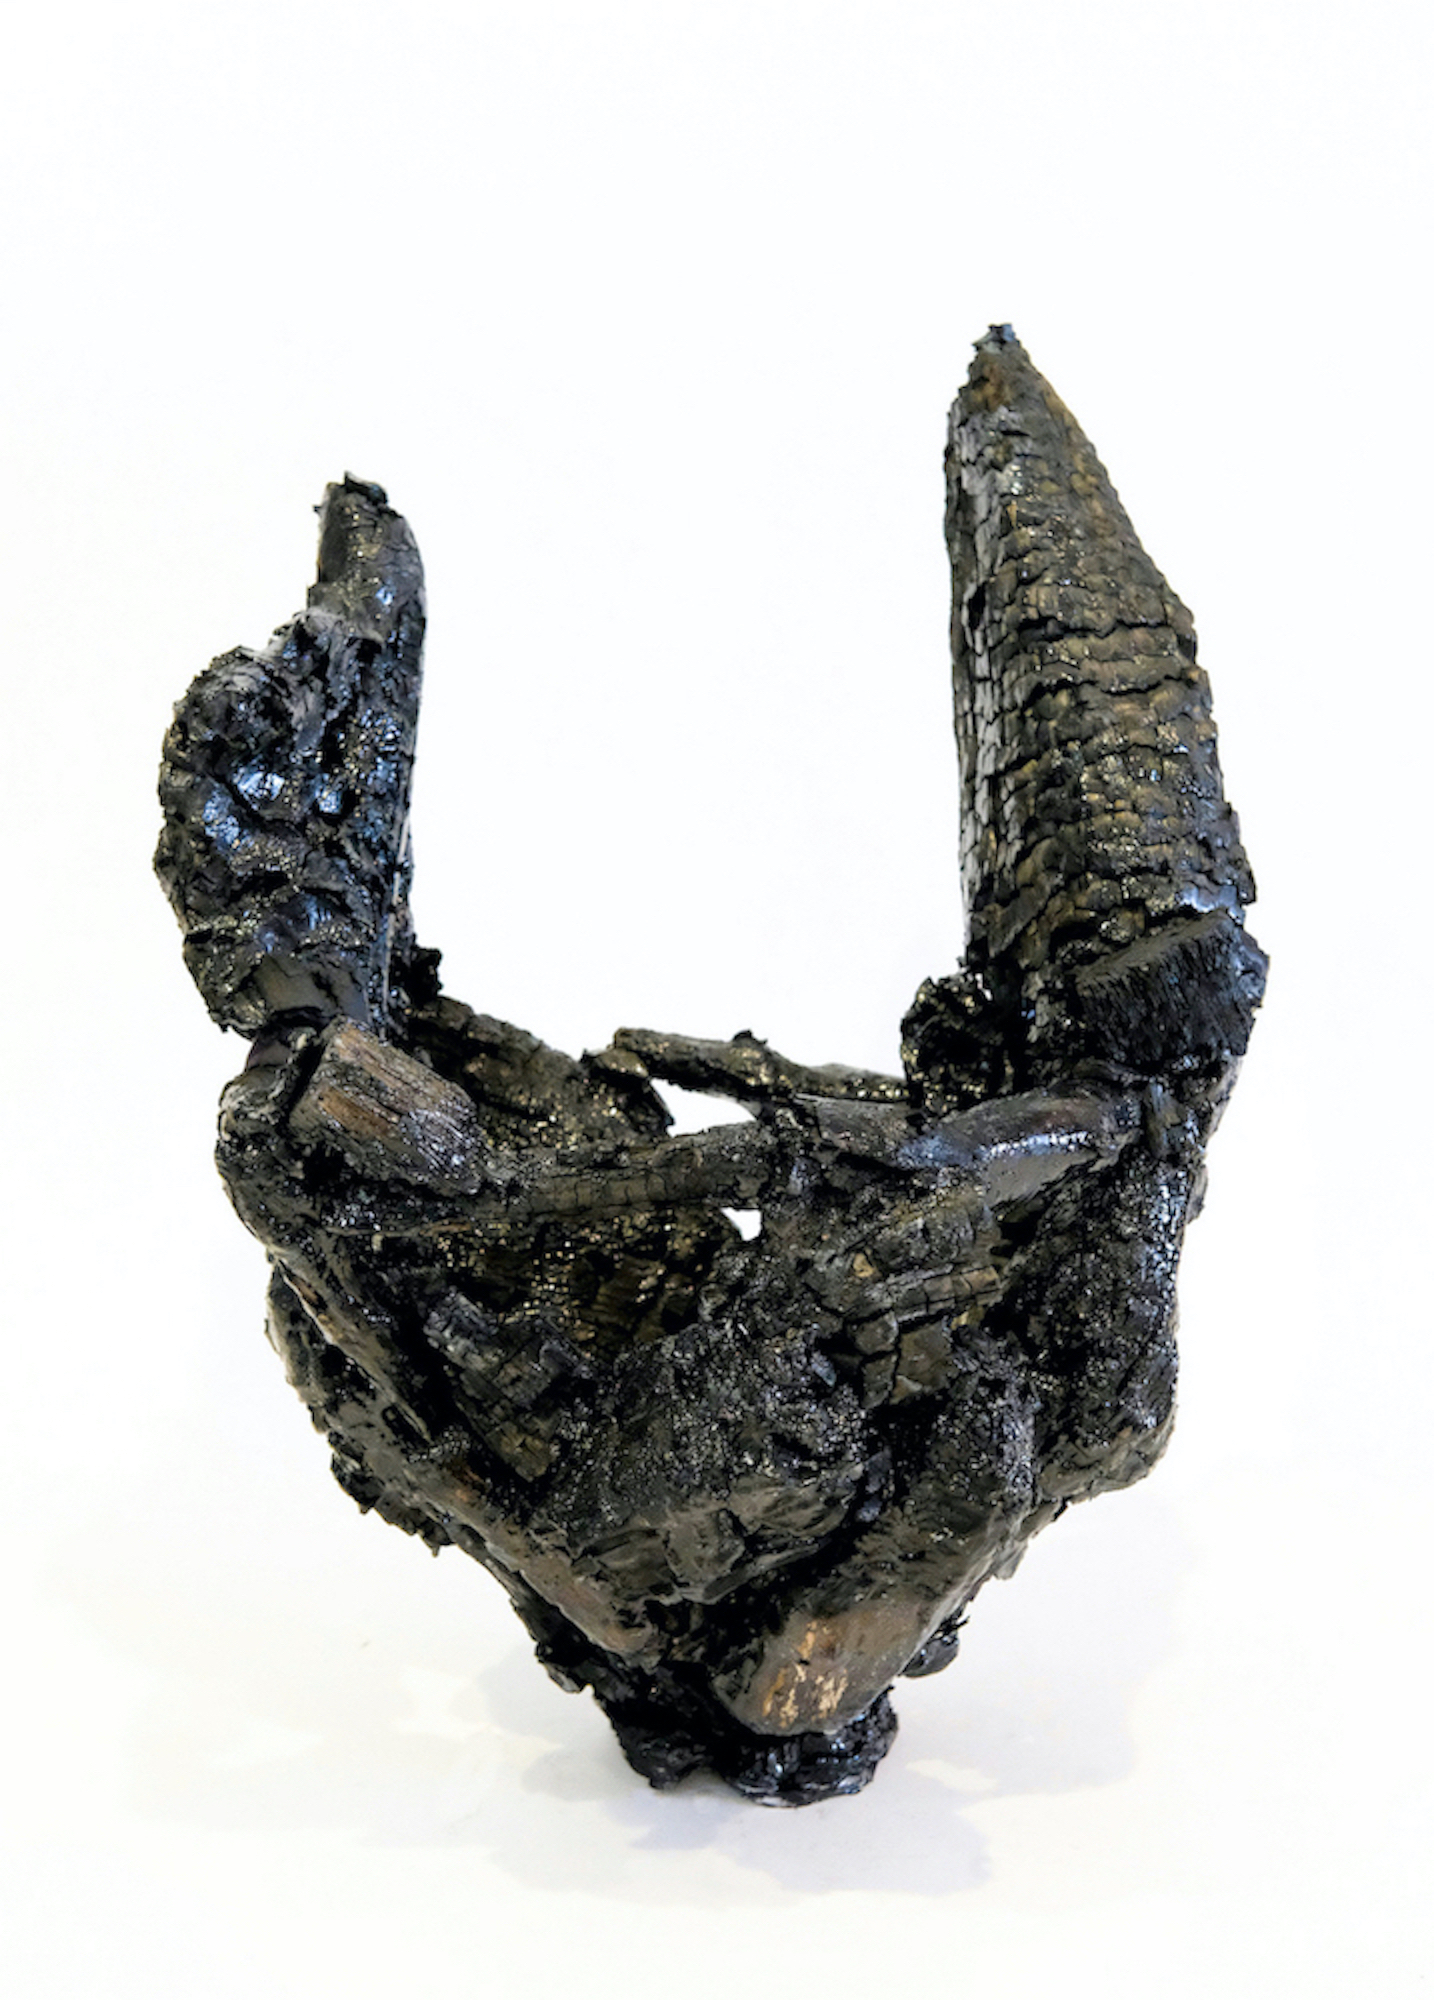 A charred black structure that resembles two horns jutting upwards.